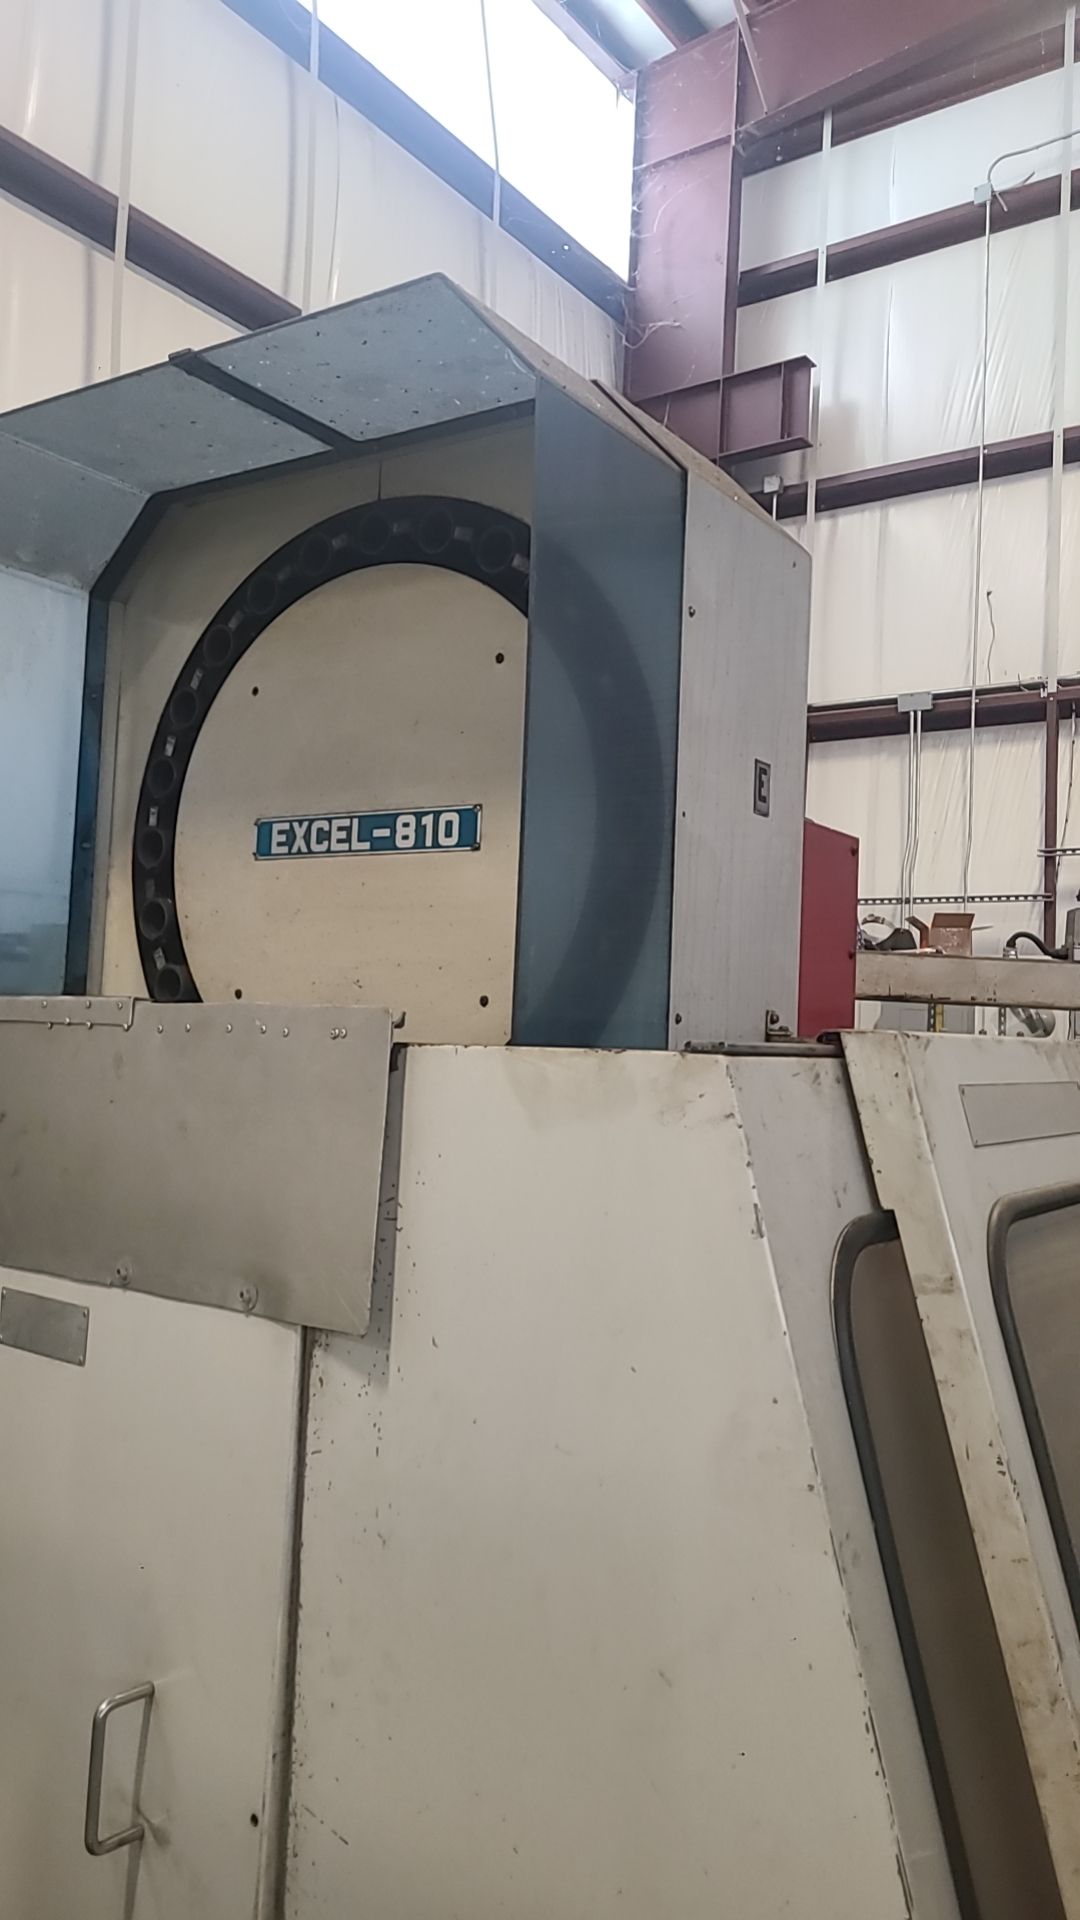 VERTICAL MACHINING CENTER, EXCEL MDL. 810, Fanuc O-M control, 35.4" x 18.9" tbl. Size, 31.9" X, 20. - Image 2 of 2